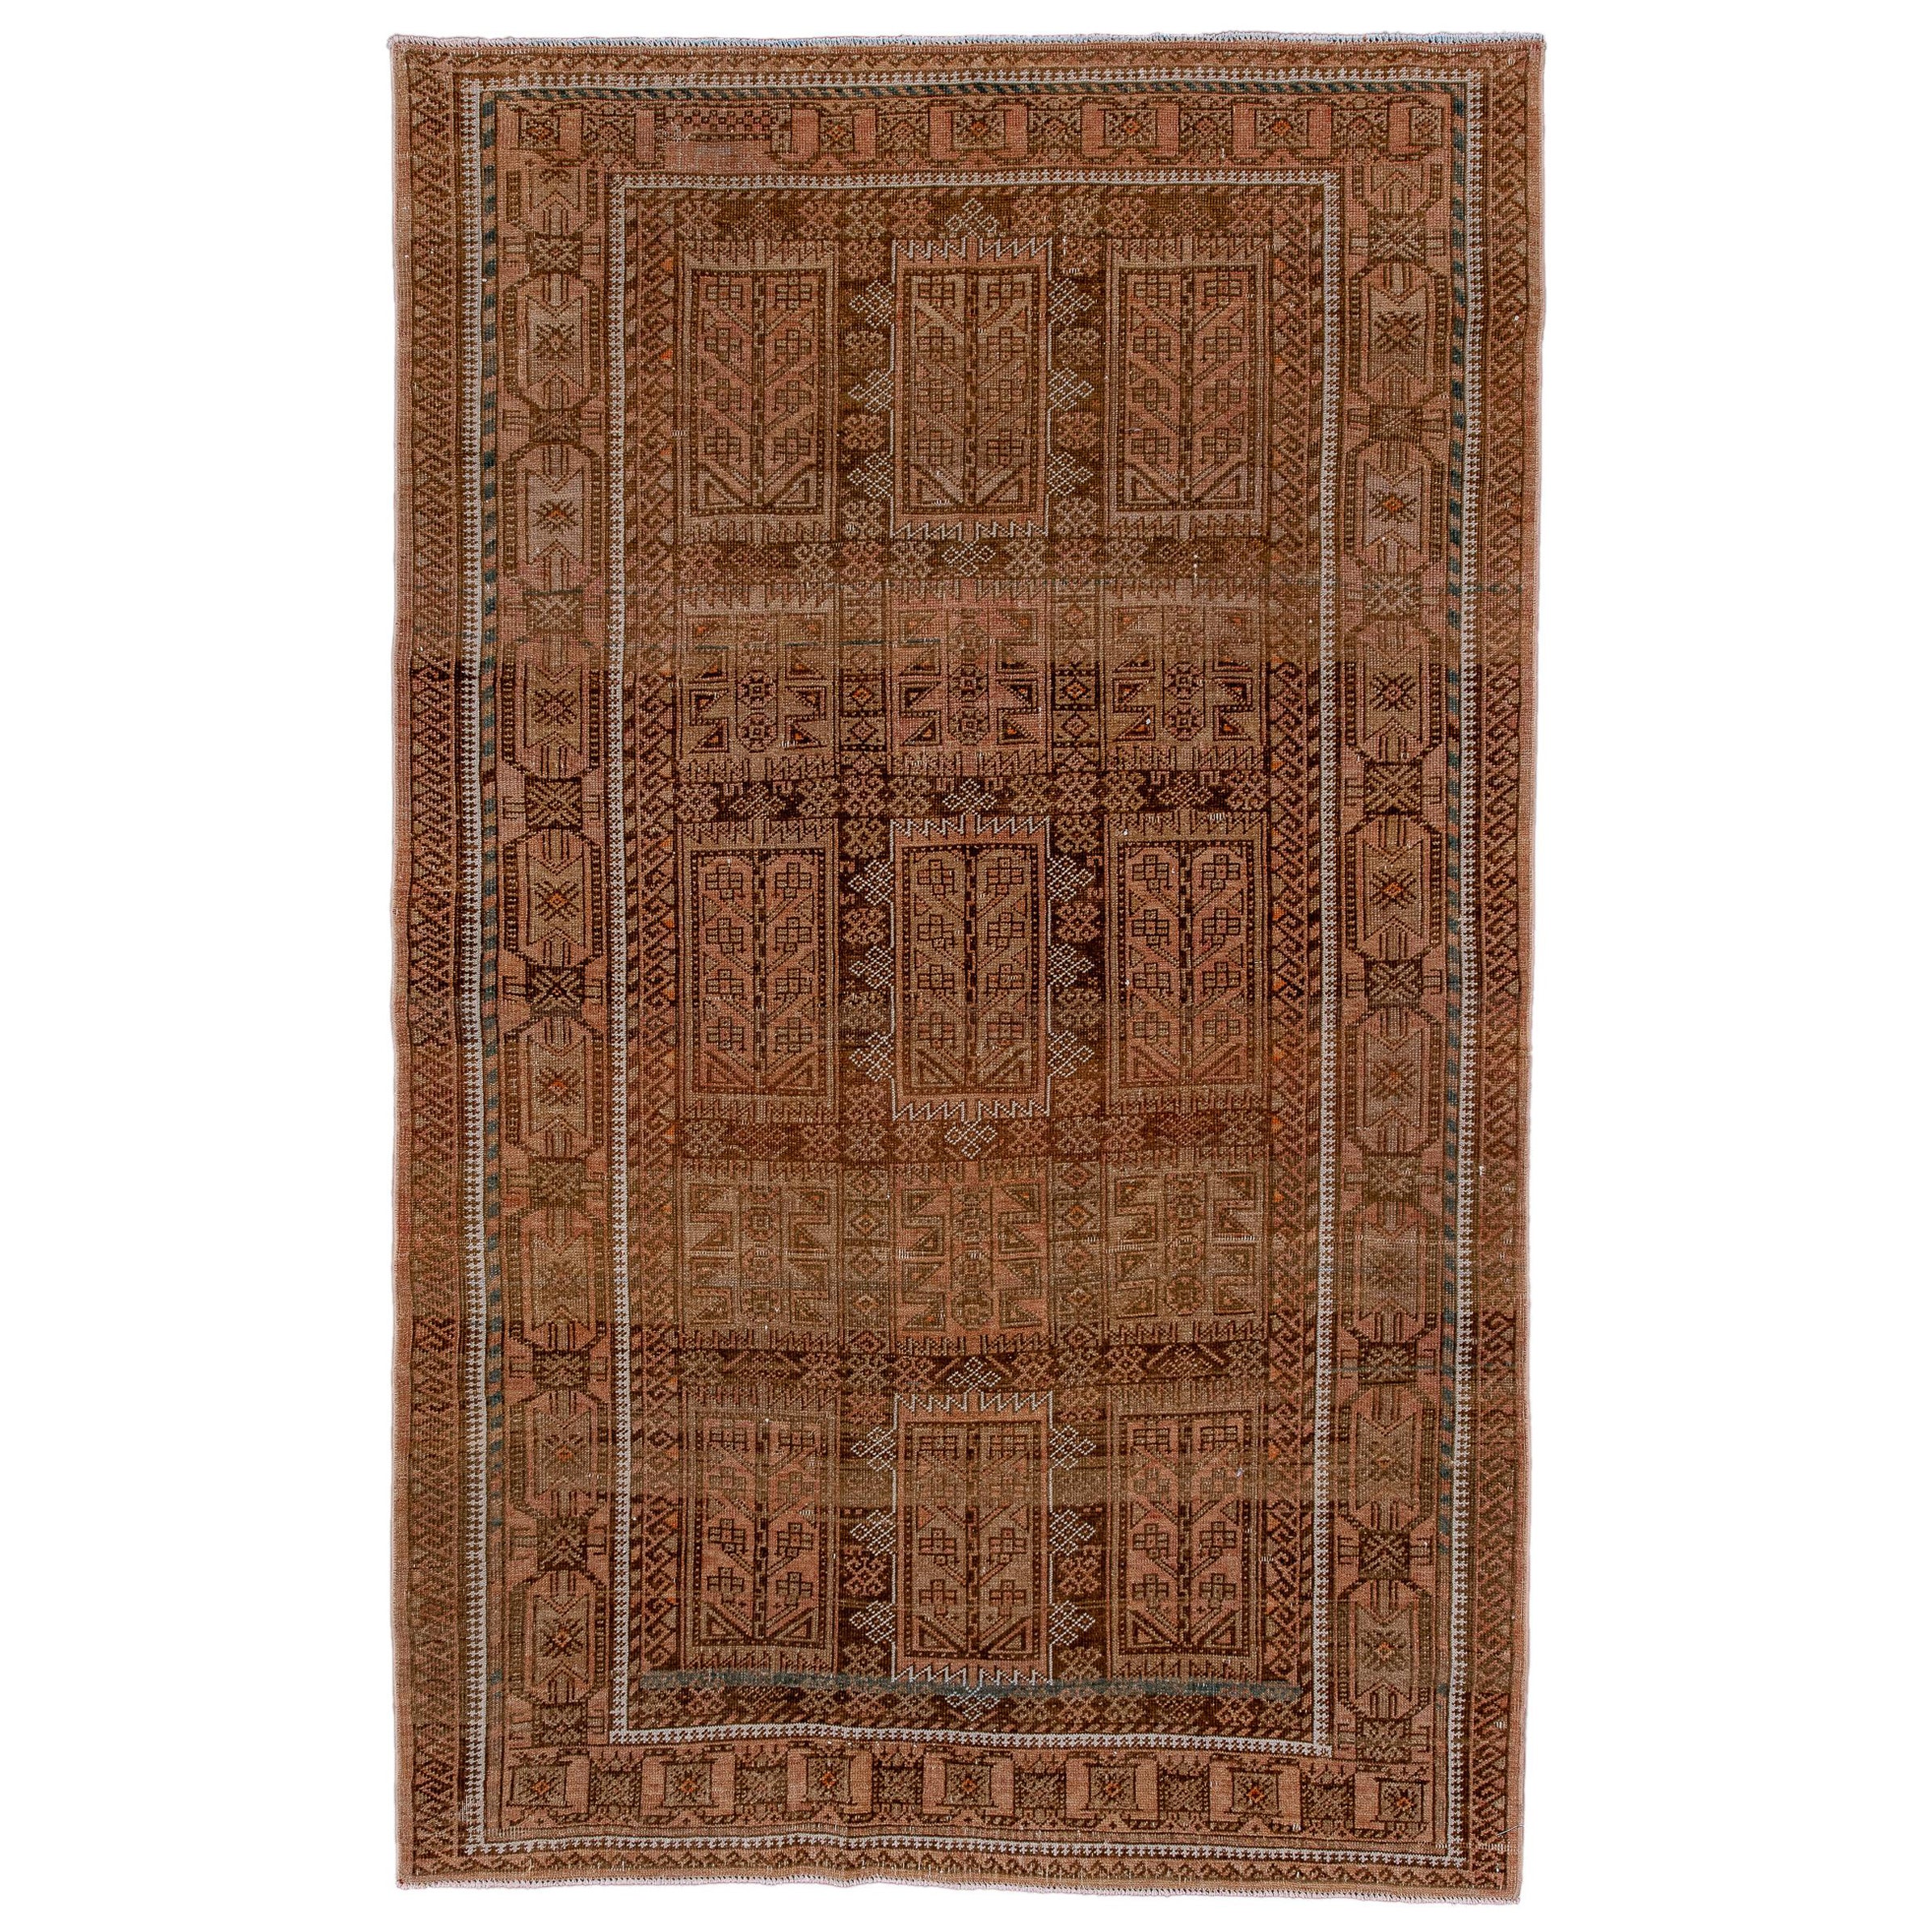 Antique Nomadic Belouch Rug with Coral Brown Colors For Sale